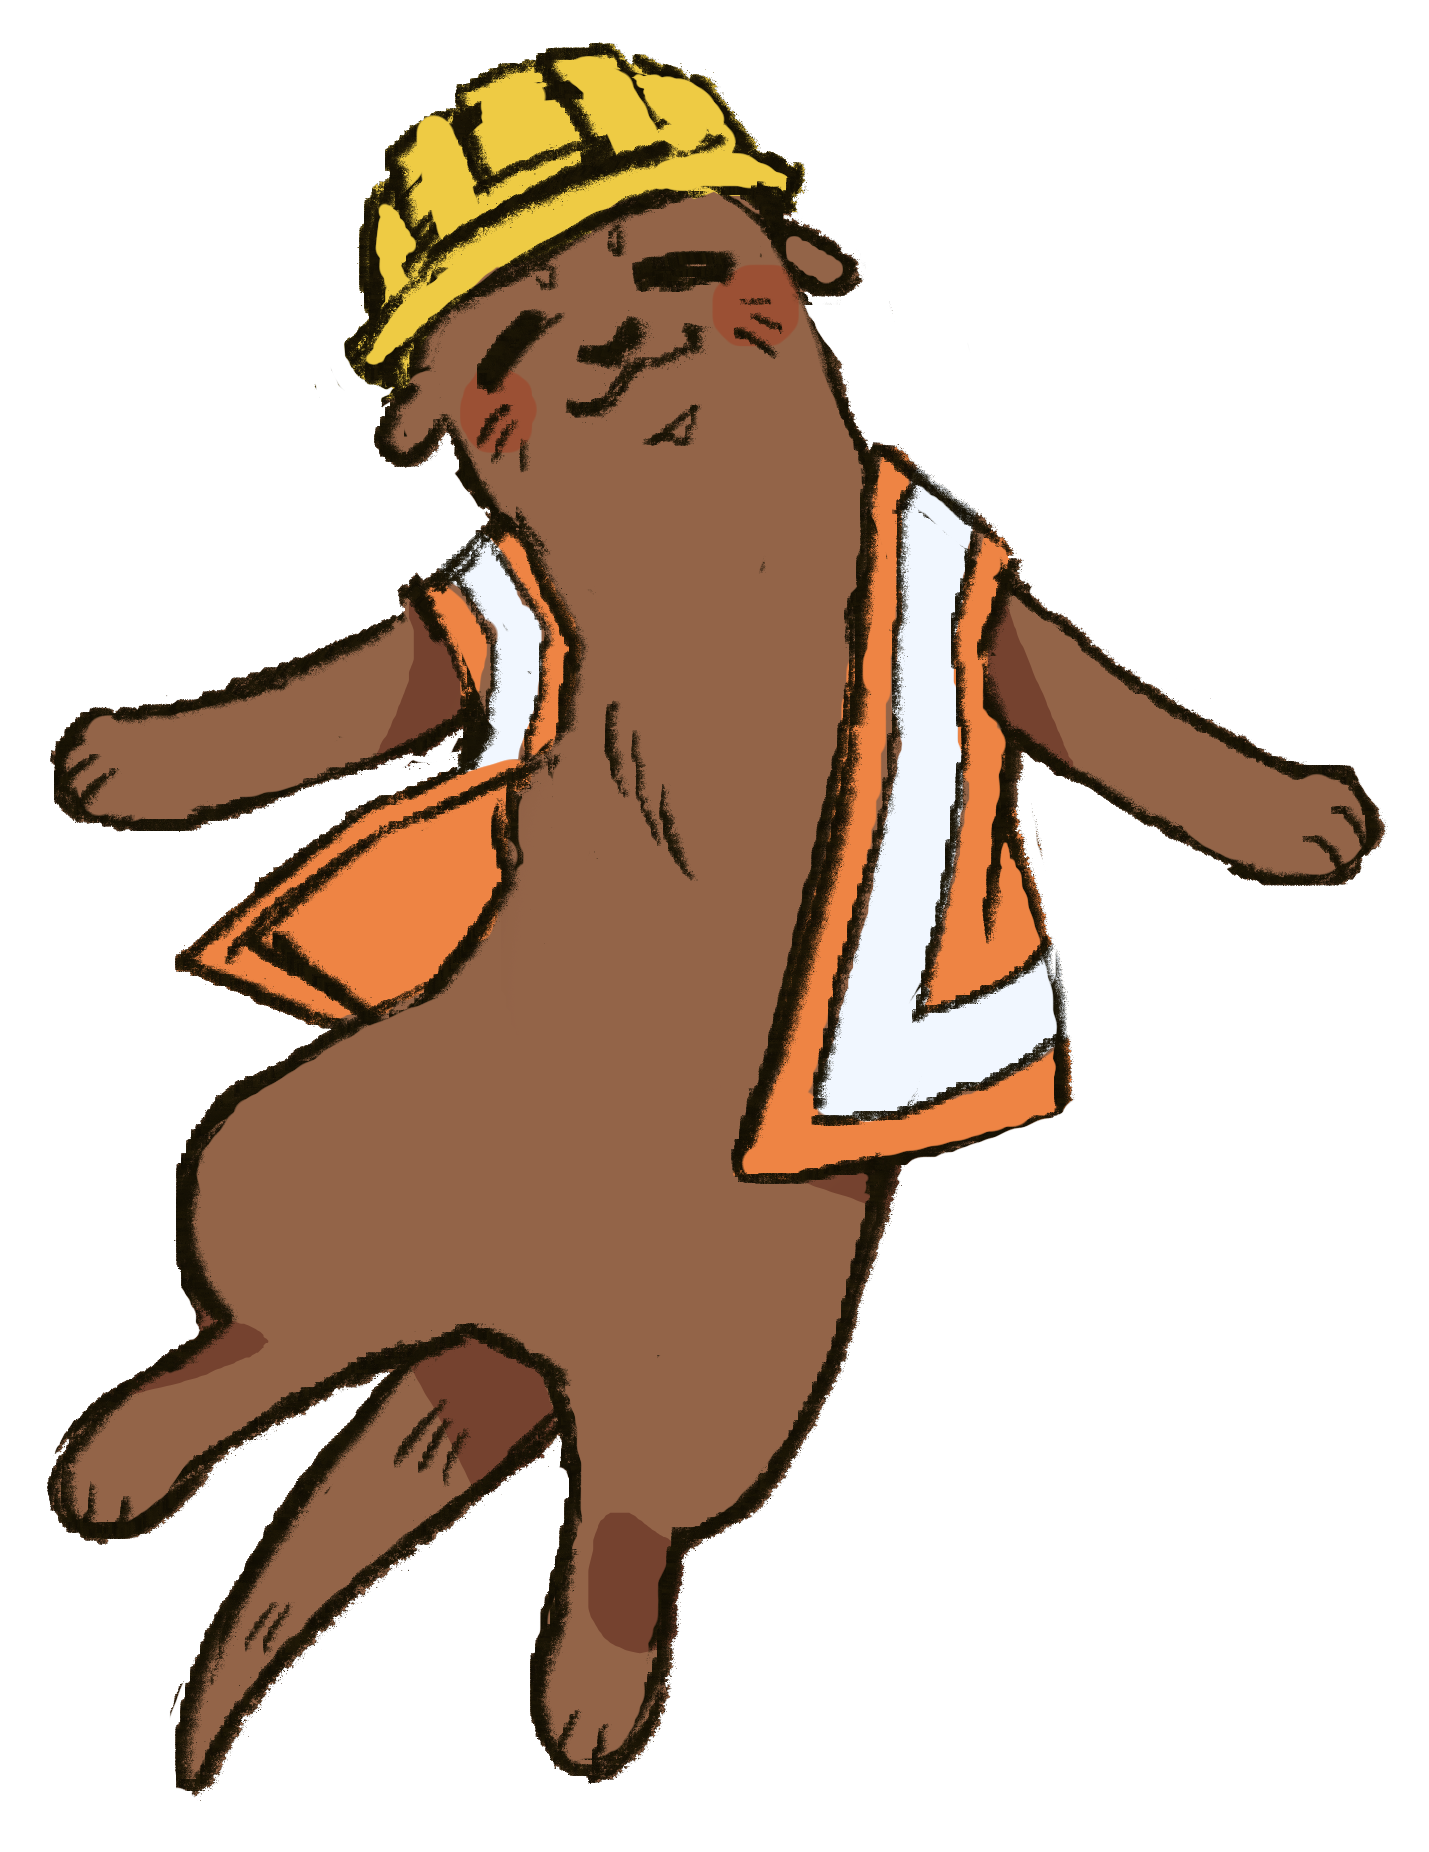 drawing of an otter in a hard hat and safety vest